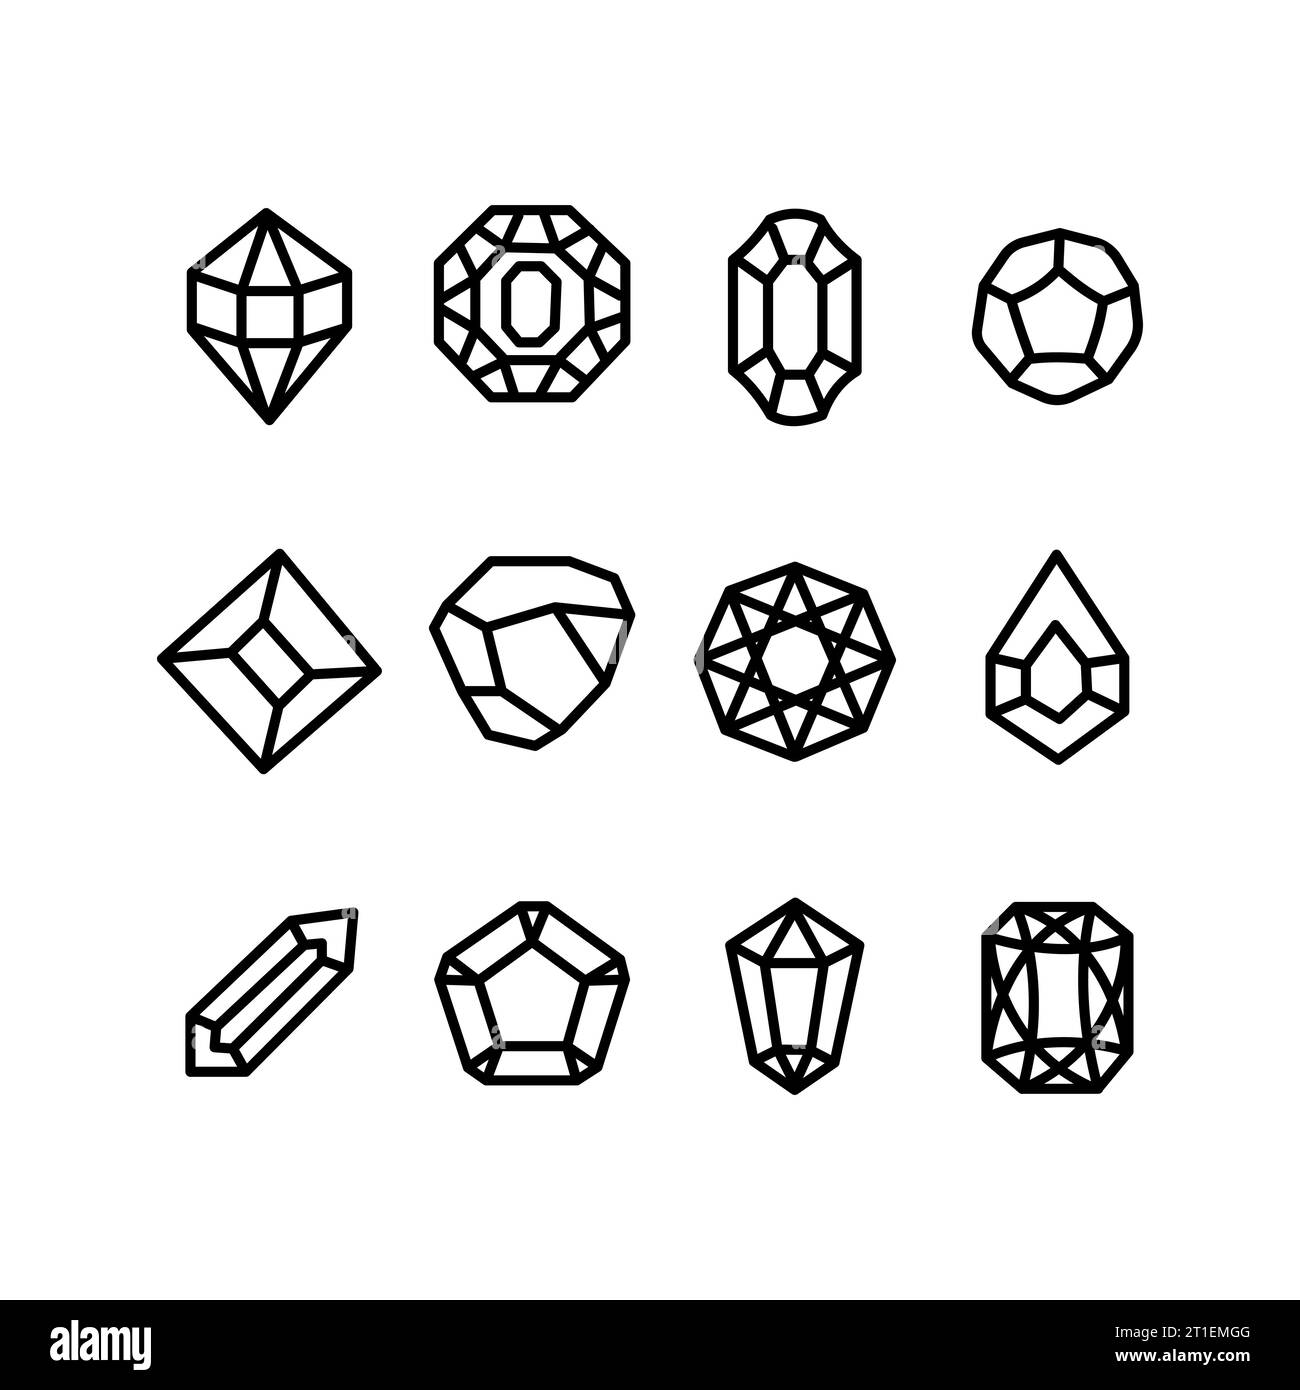 Gems and Jewelry Clipart & Logos Gems Clipart, Jewels Clip Art, Rocks and  Minerals, Necklaces, Rings, Logo Design, Instant Download 